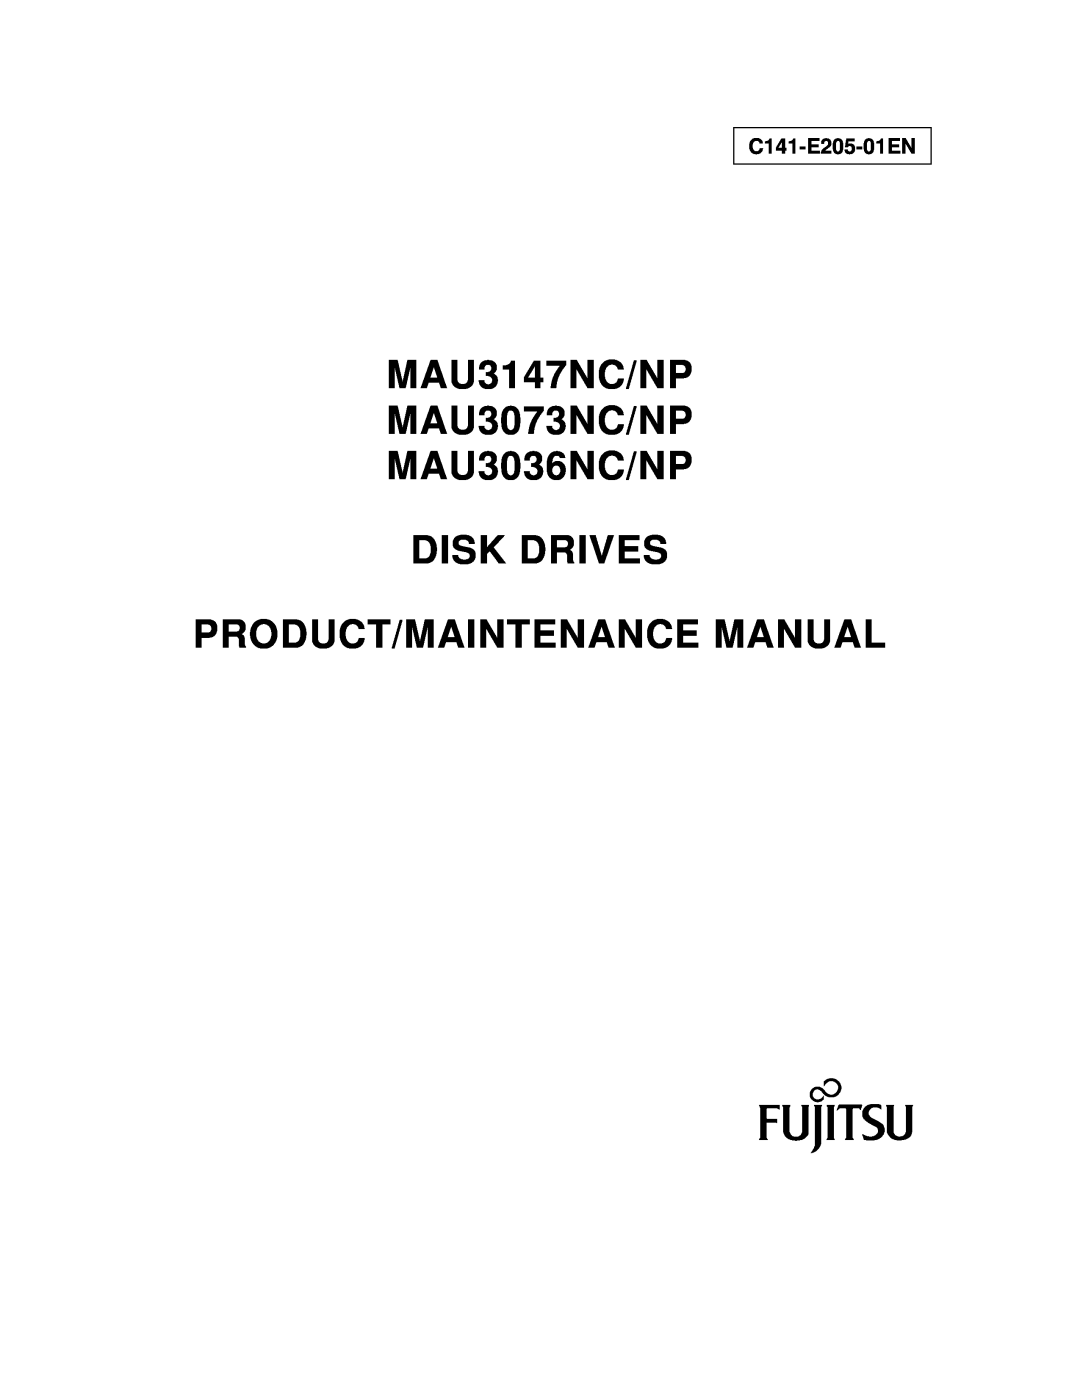 Fujitsu MAU3147NC/NP, MAU3073NC/NP specifications Handling, Reference value of airflow, Disk Drives Installation Guide 